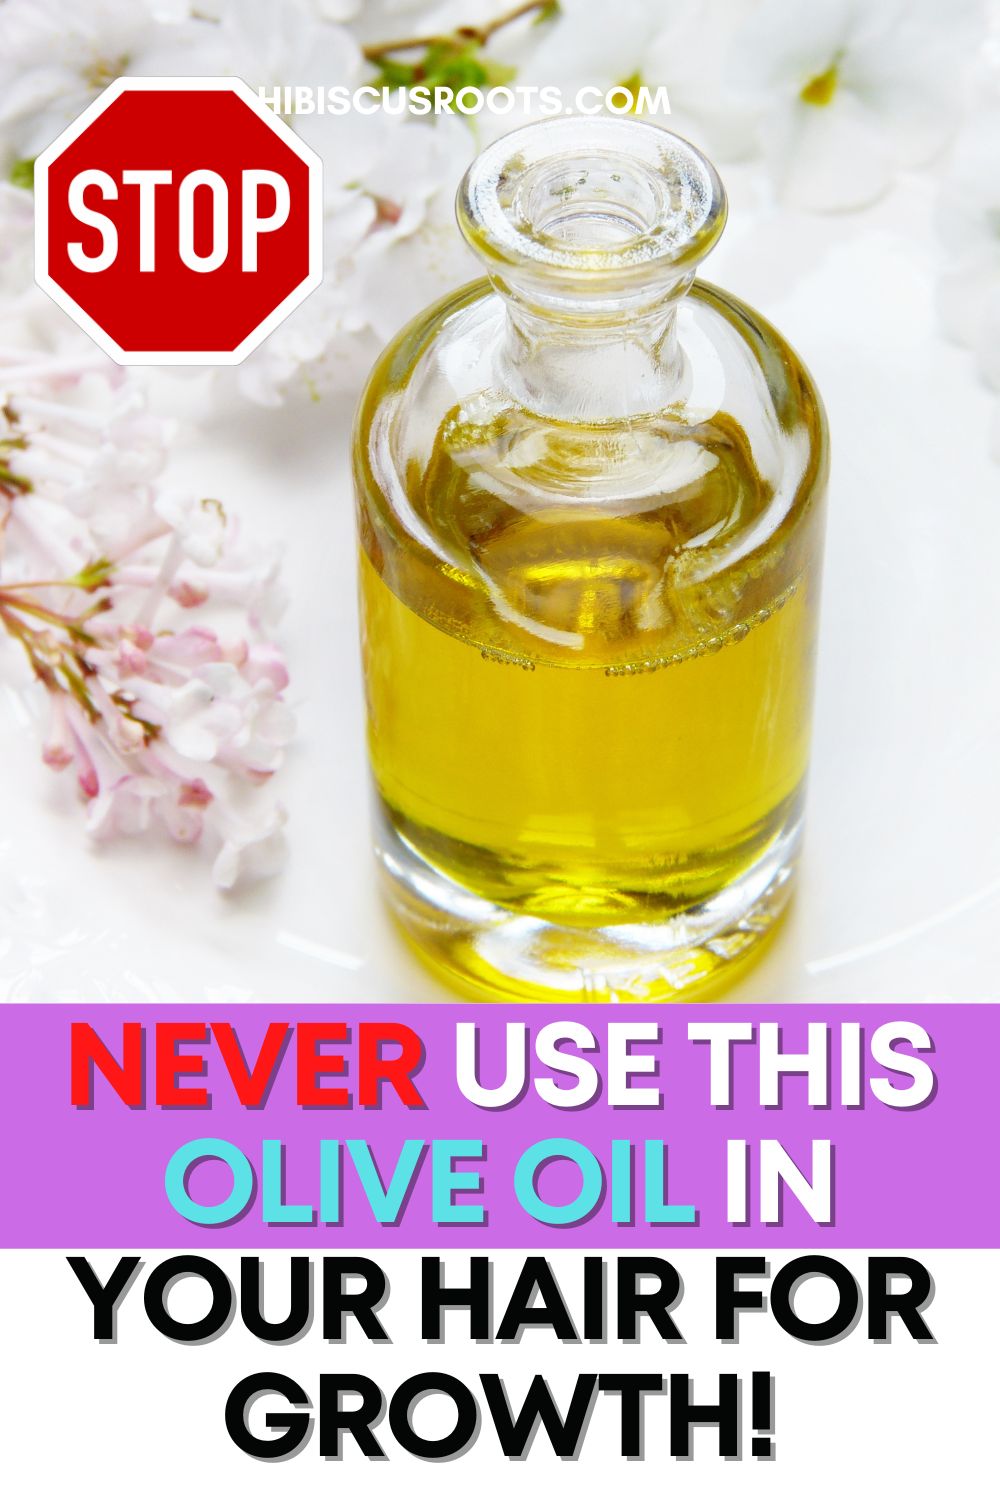 Why Olive Oil is so Good for Your Hair!